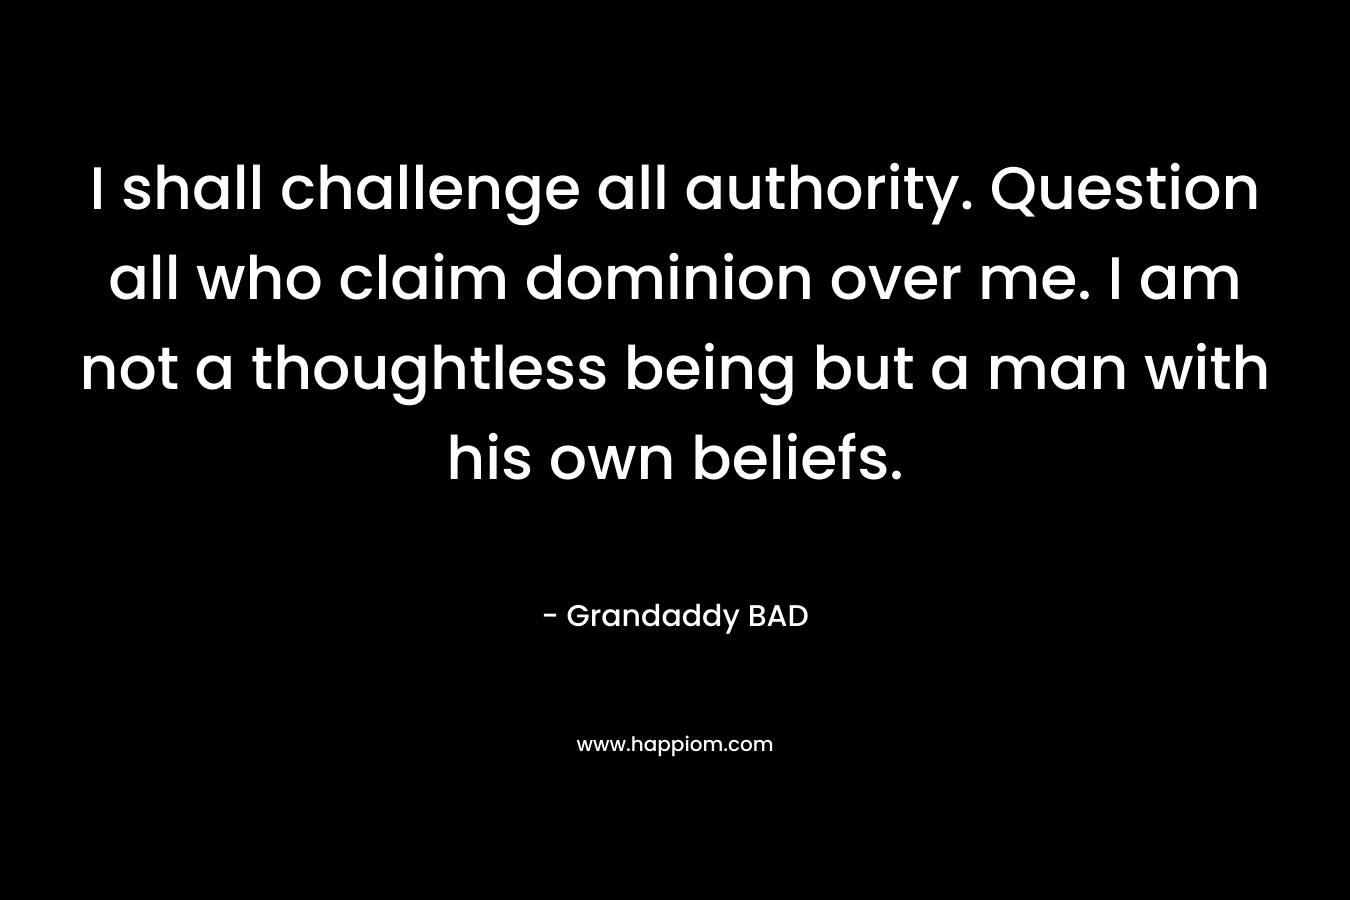 I shall challenge all authority. Question all who claim dominion over me. I am not a thoughtless being but a man with his own beliefs. – Grandaddy BAD